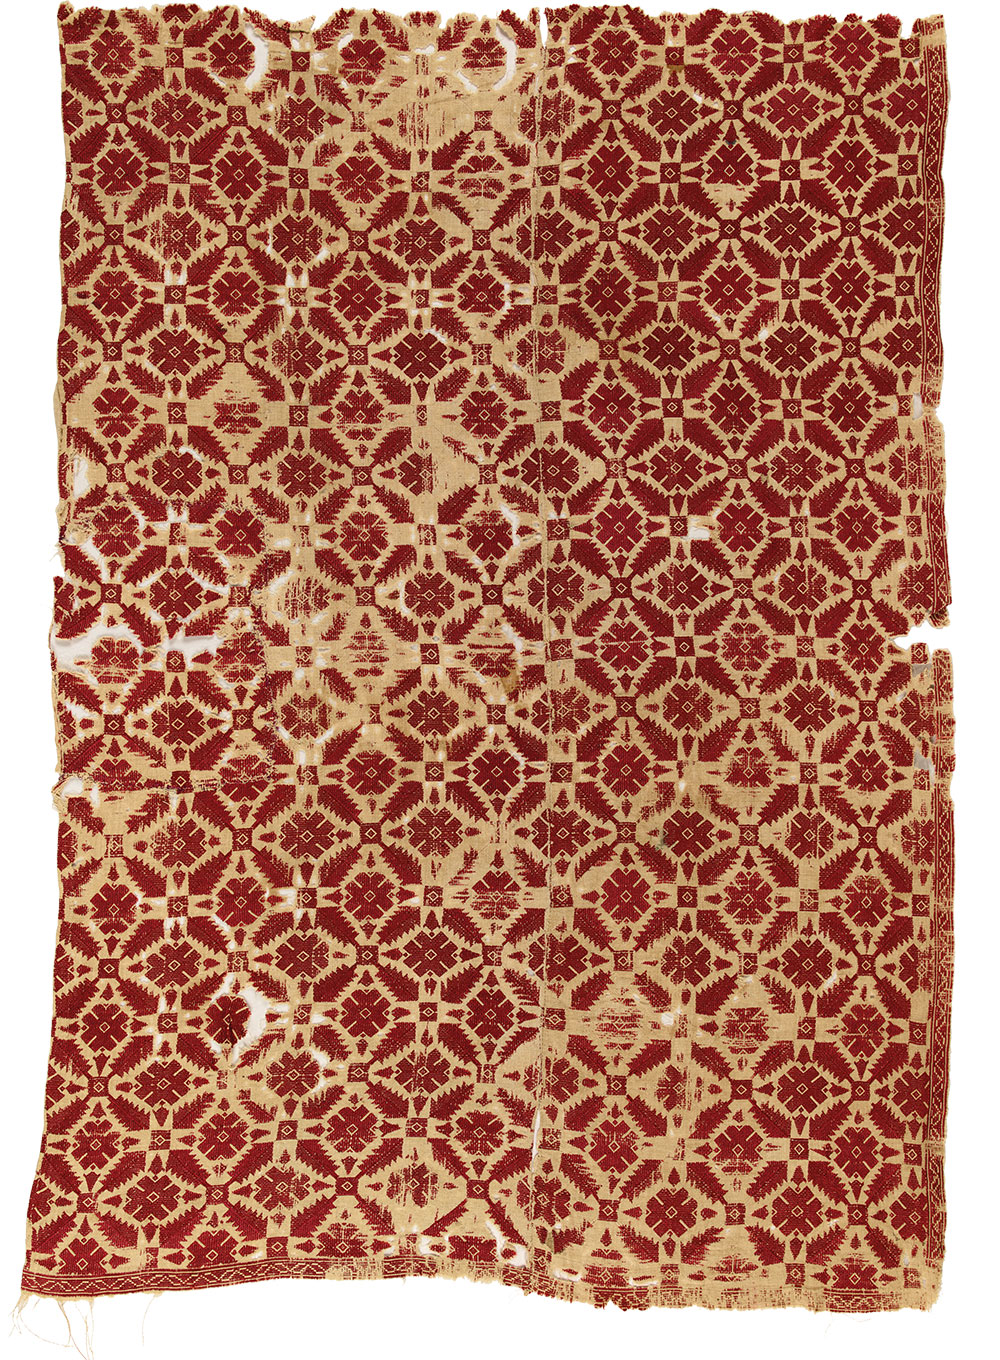 (8) Section of a bedspread, Naxos, Cyclades, 18th century. Silk on linen, 0.82 x 1.20 m (2' 8" x 3' 11"). Ashmolean Museum of Art and Archaeology, University of Oxford, EA1978.113, Presented by John Buxton, 1978